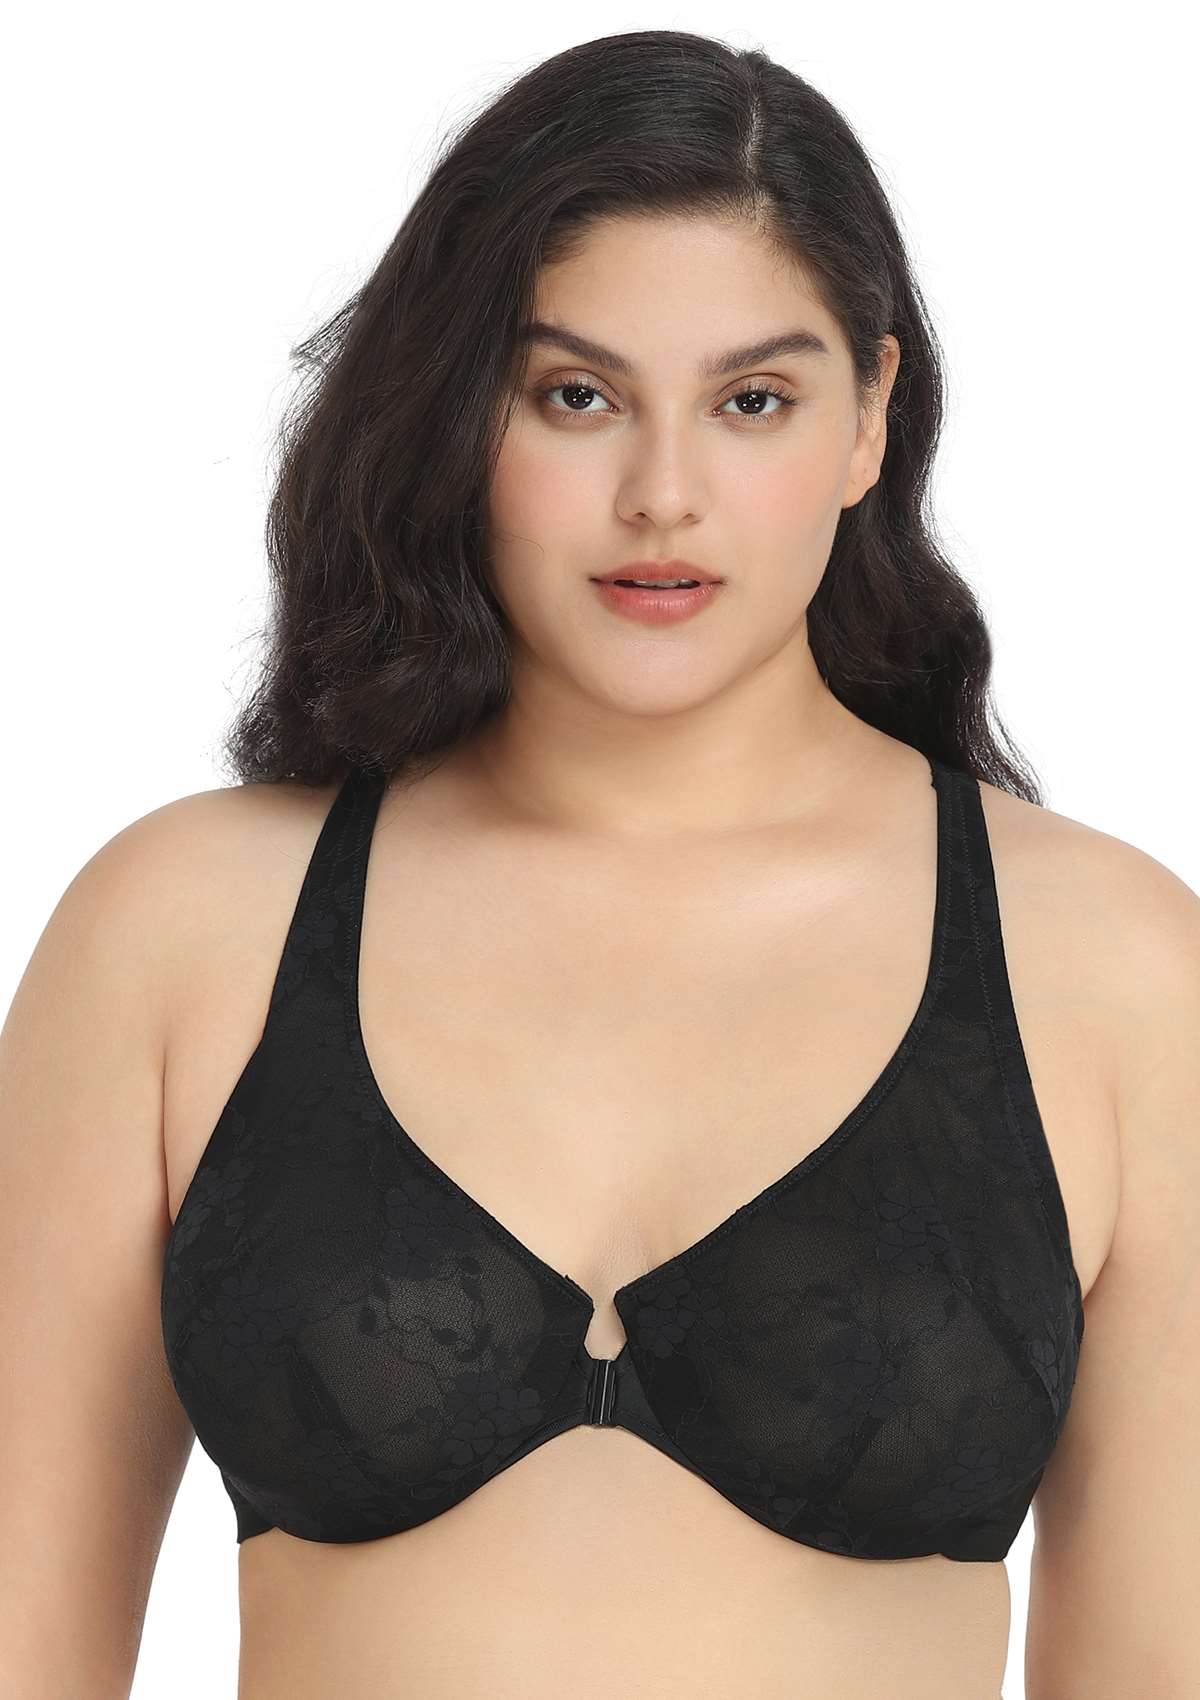 HSIA Spring Romance Front-Close Floral Lace Unlined Full Coverage Bra - Black / 38 / G